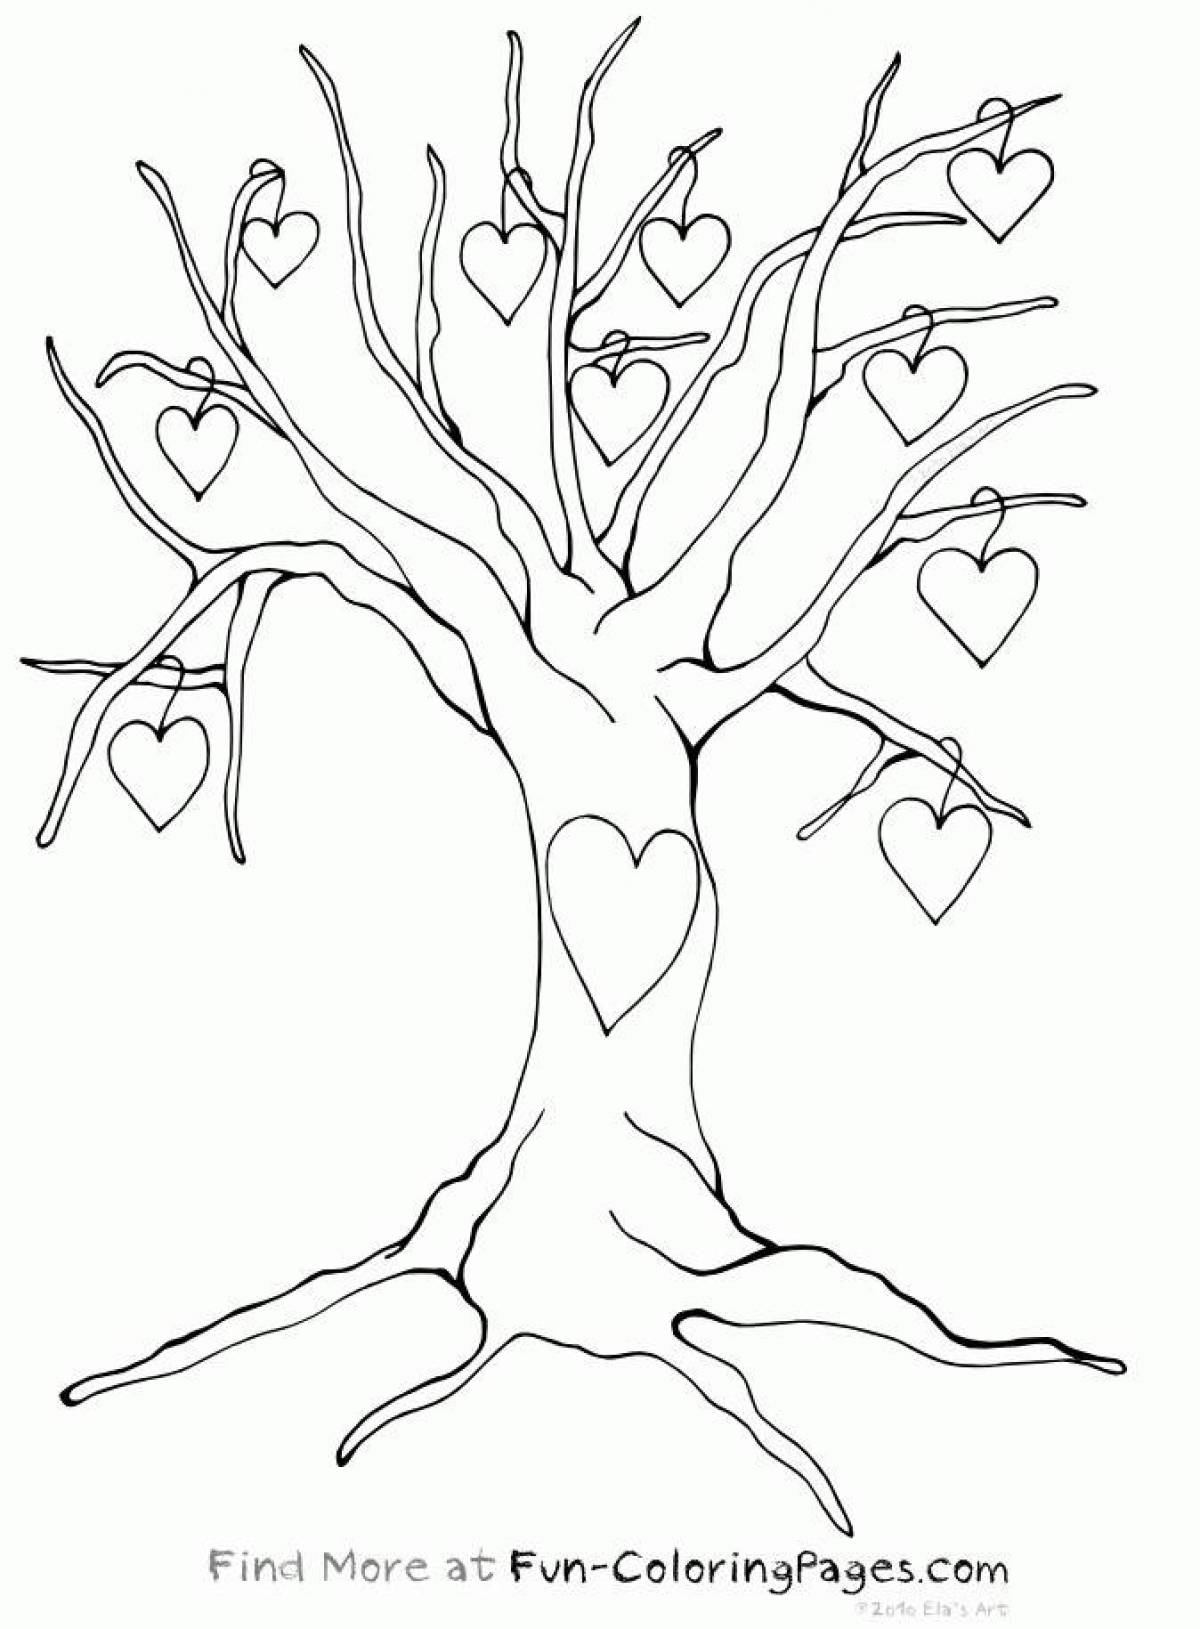 Amazing tree without leaves coloring book for kids